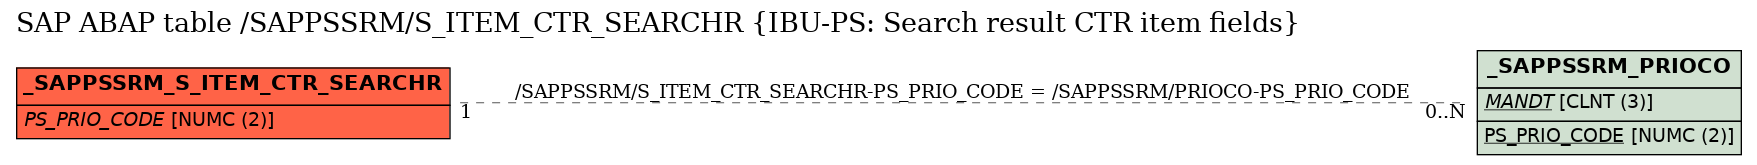 E-R Diagram for table /SAPPSSRM/S_ITEM_CTR_SEARCHR (IBU-PS: Search result CTR item fields)